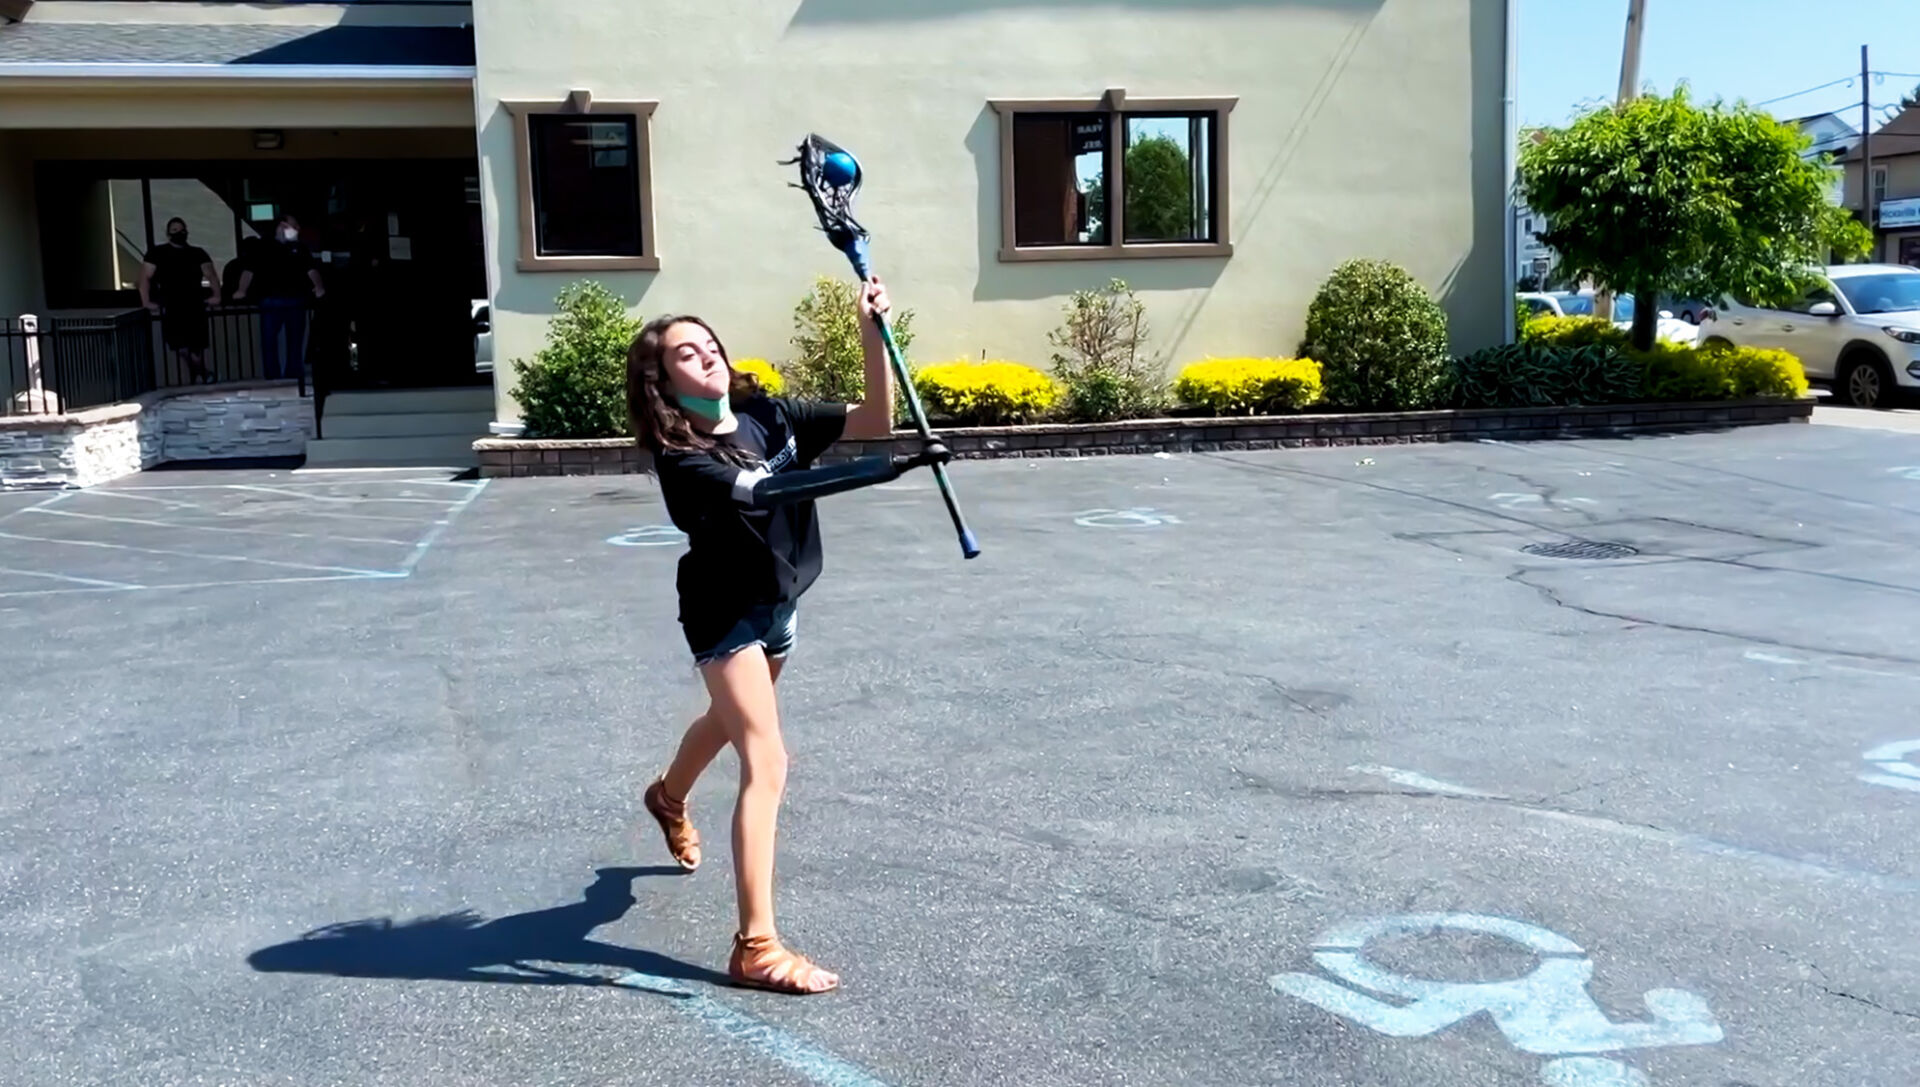 young girl playing lacrosse with prosthetic hand